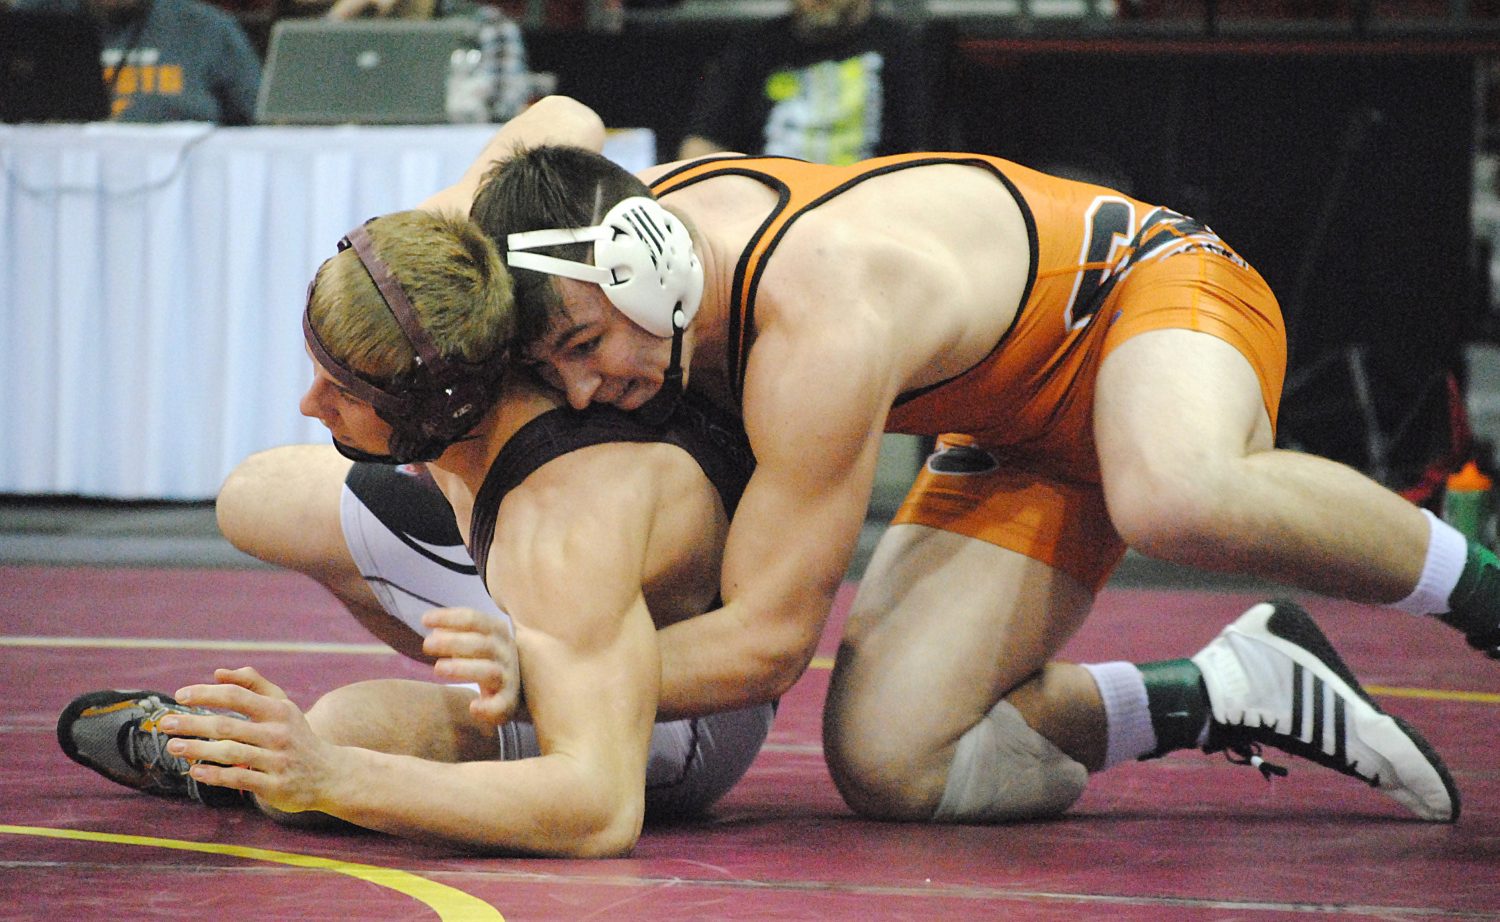 Stratford’s Kamren Bornbach will attempt to win his fourth-straight Marawood Conference individual title on Saturday when the Tigers host the conference tournament.